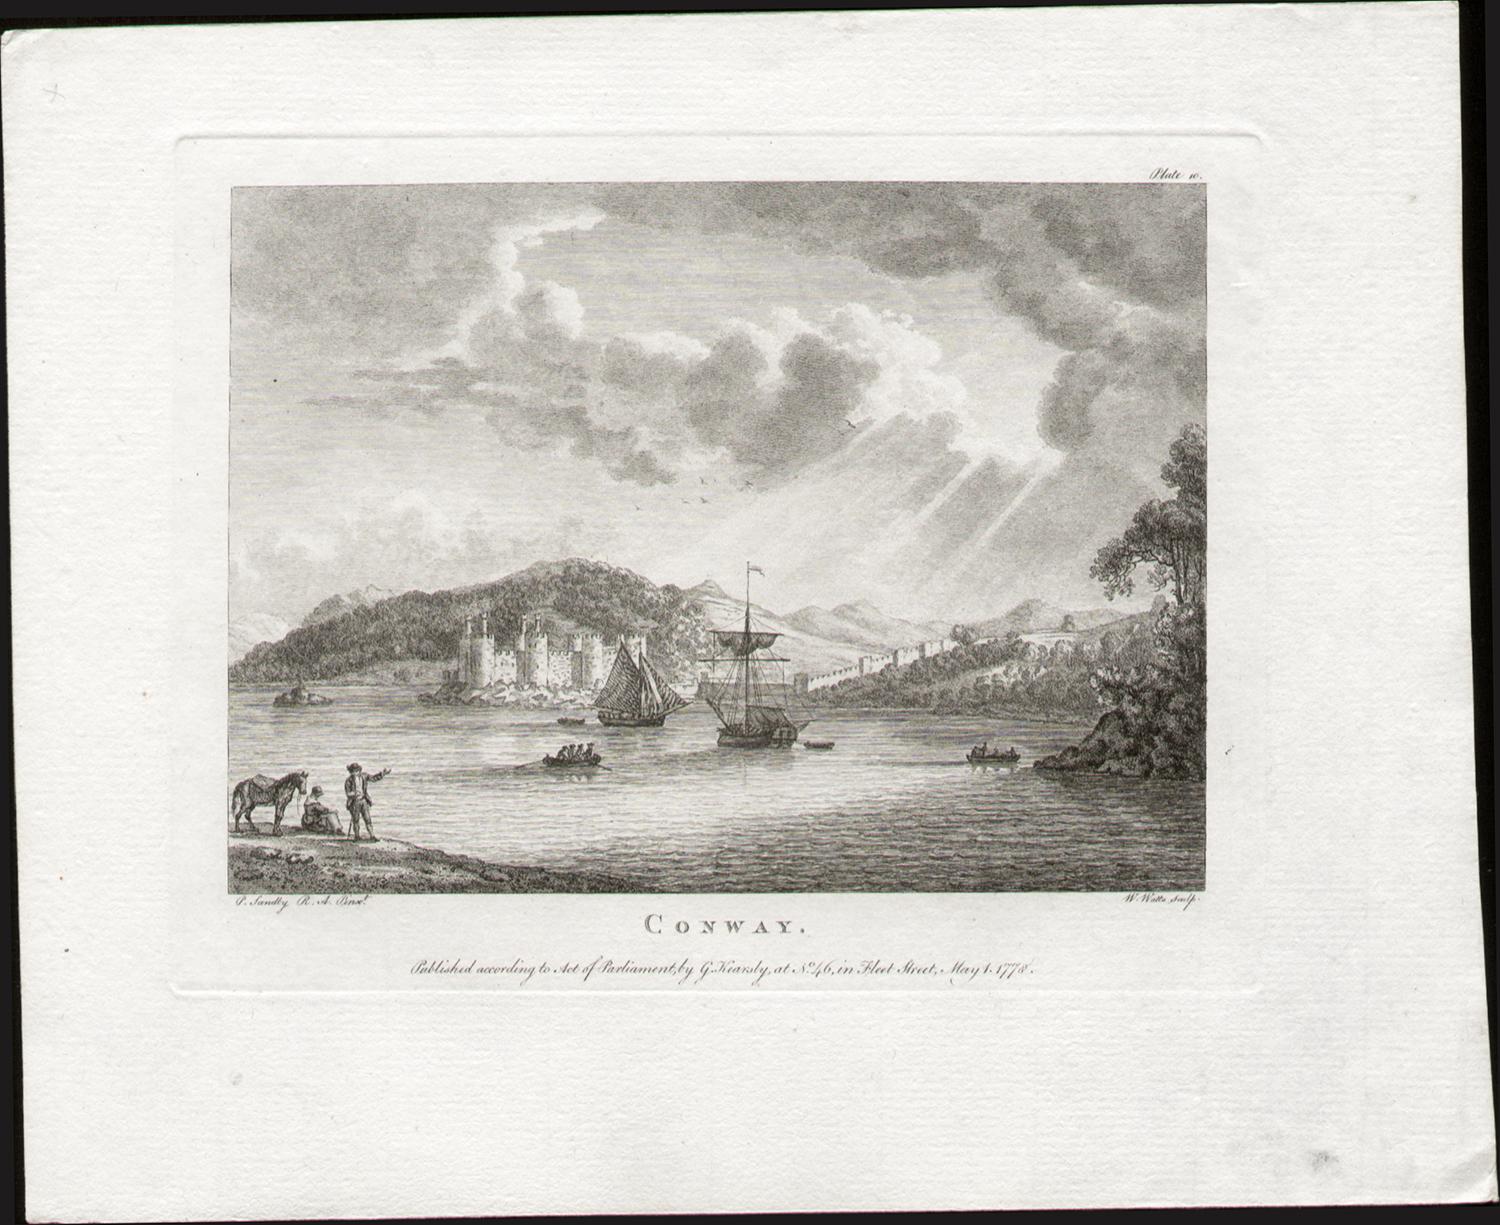 'Conway'

Engraving by William Watts (1752-1851) after Paul Sandby (1731-1809).

From Paul Sandby's 'The Virtuosi's Museum, Containing Select Views in England, Scotland, and Ireland', published by George Kearsley. 

Paul Sandby was an important